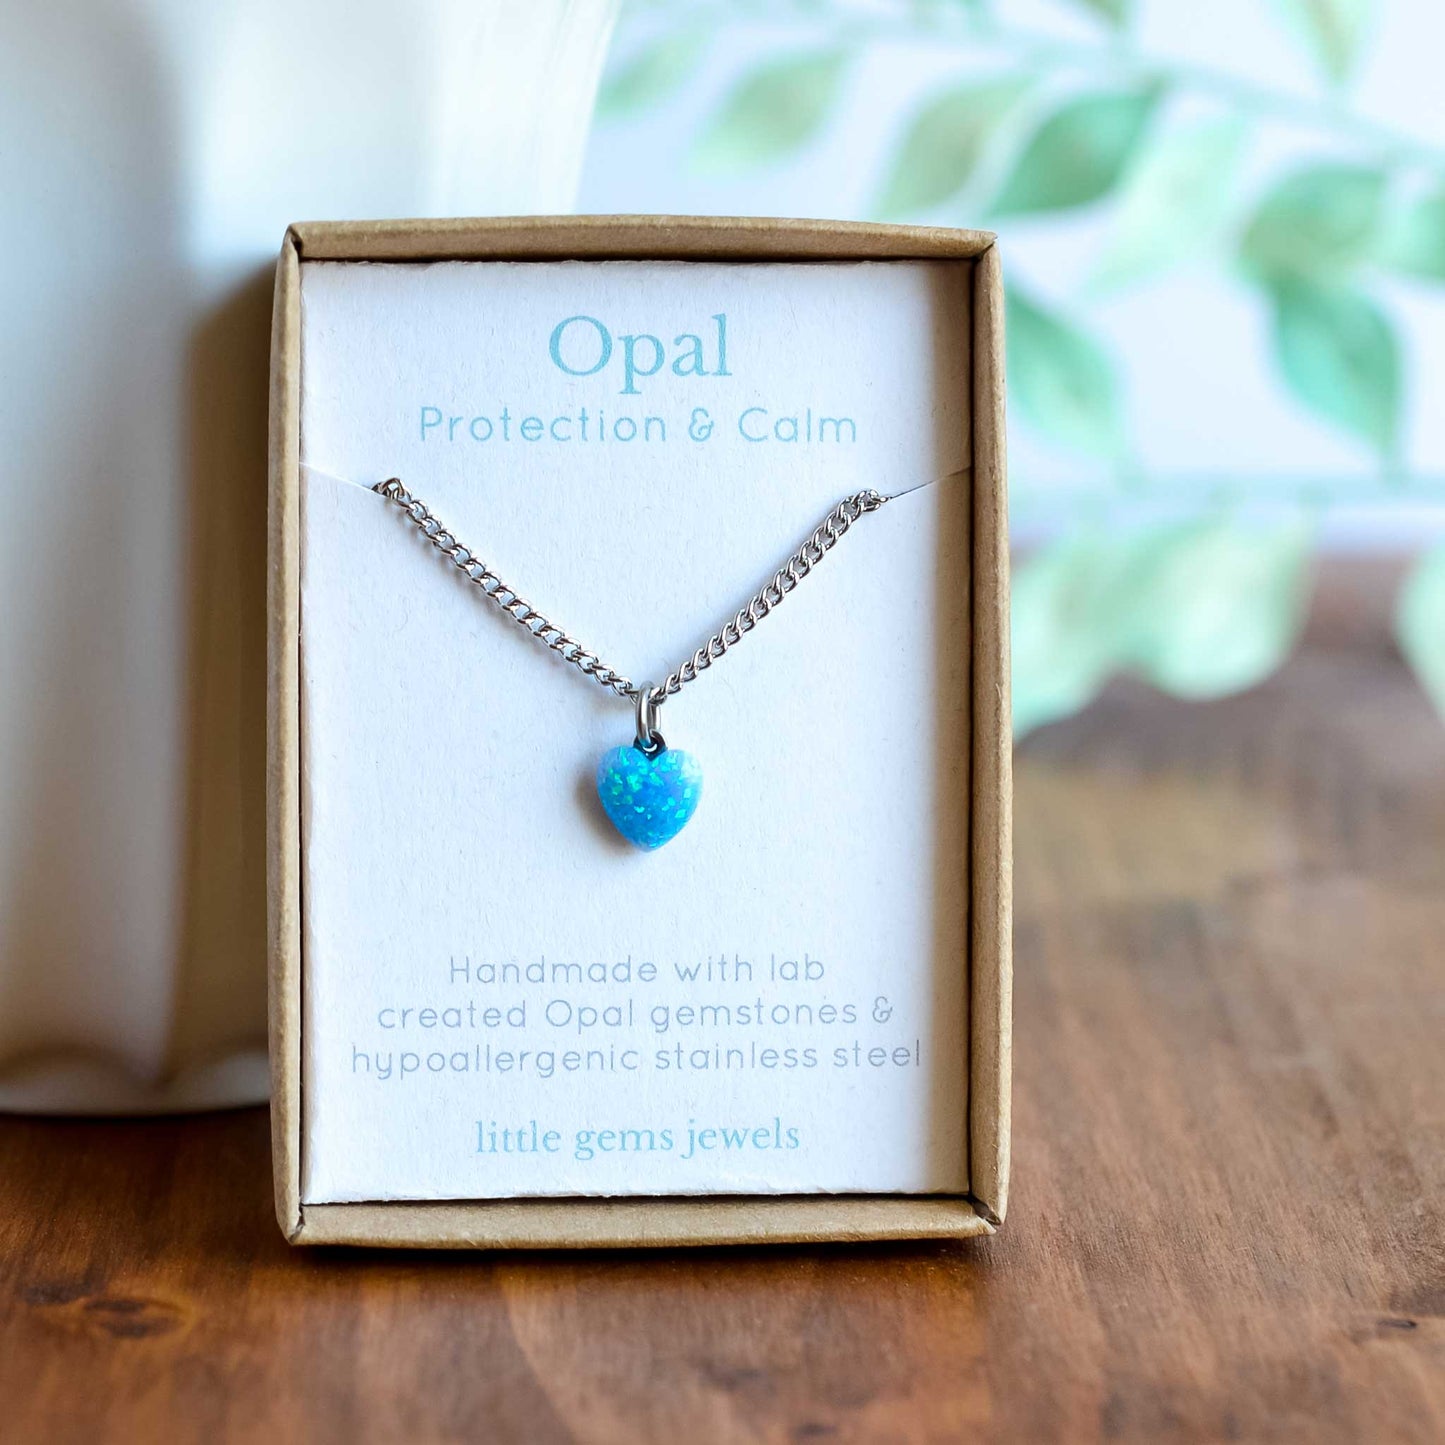 Blue Opal heart pendant necklace in gift box